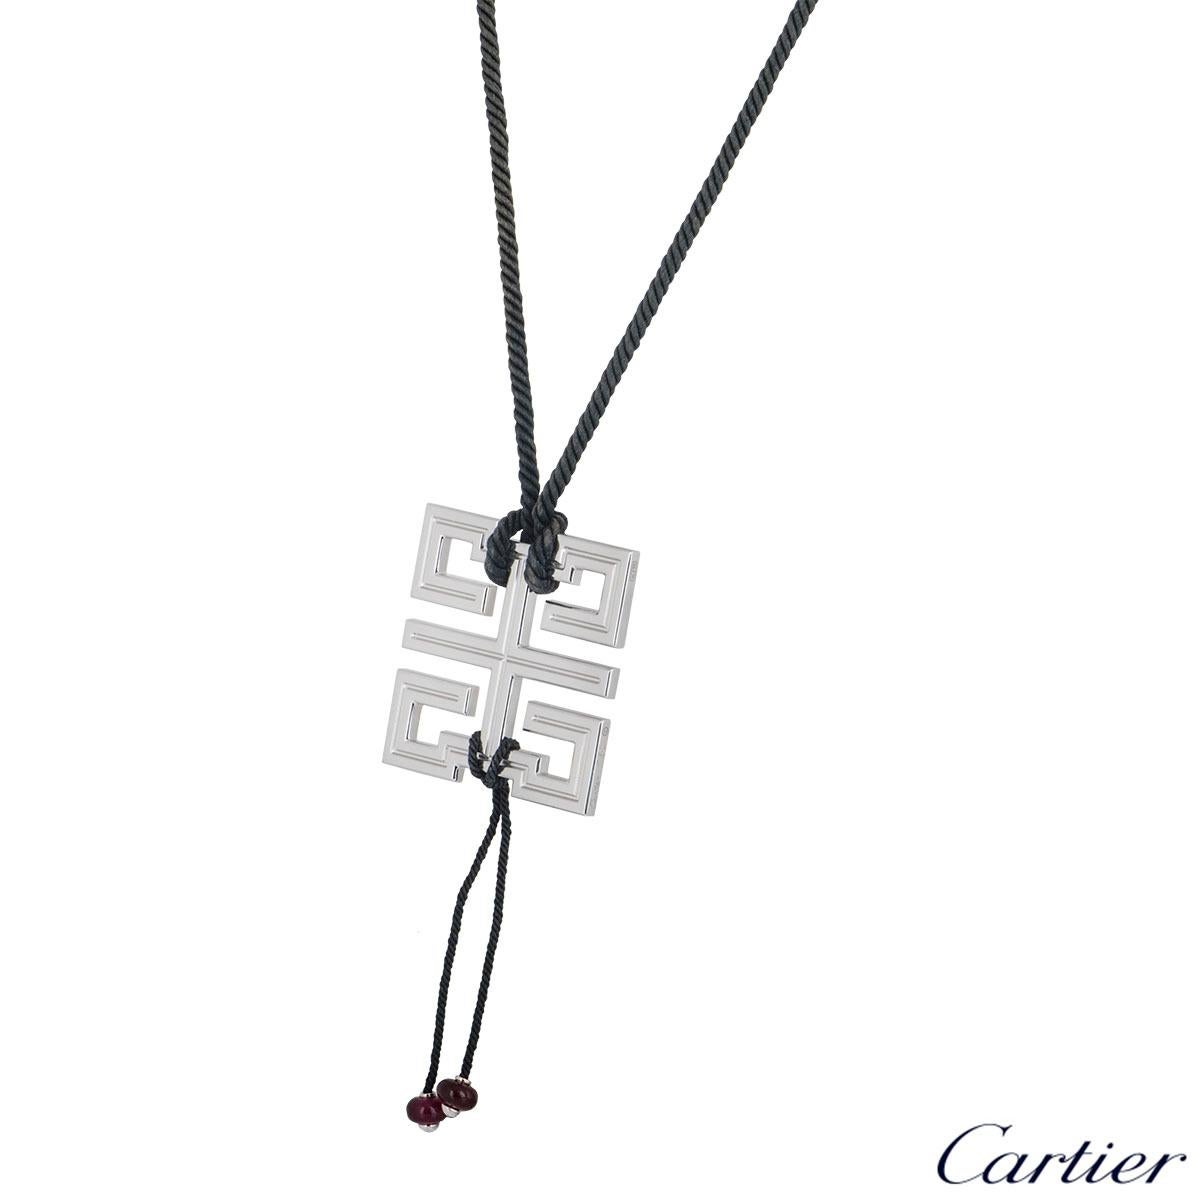 A stylish 18k white gold pendant by Cartier from the Le Baiser Du Dragon collection. The pendant features the dragon motif symbol with a twisted black cord tied and hanging at the bottom are two ruby beads. The pendant comes with an adjustable cord